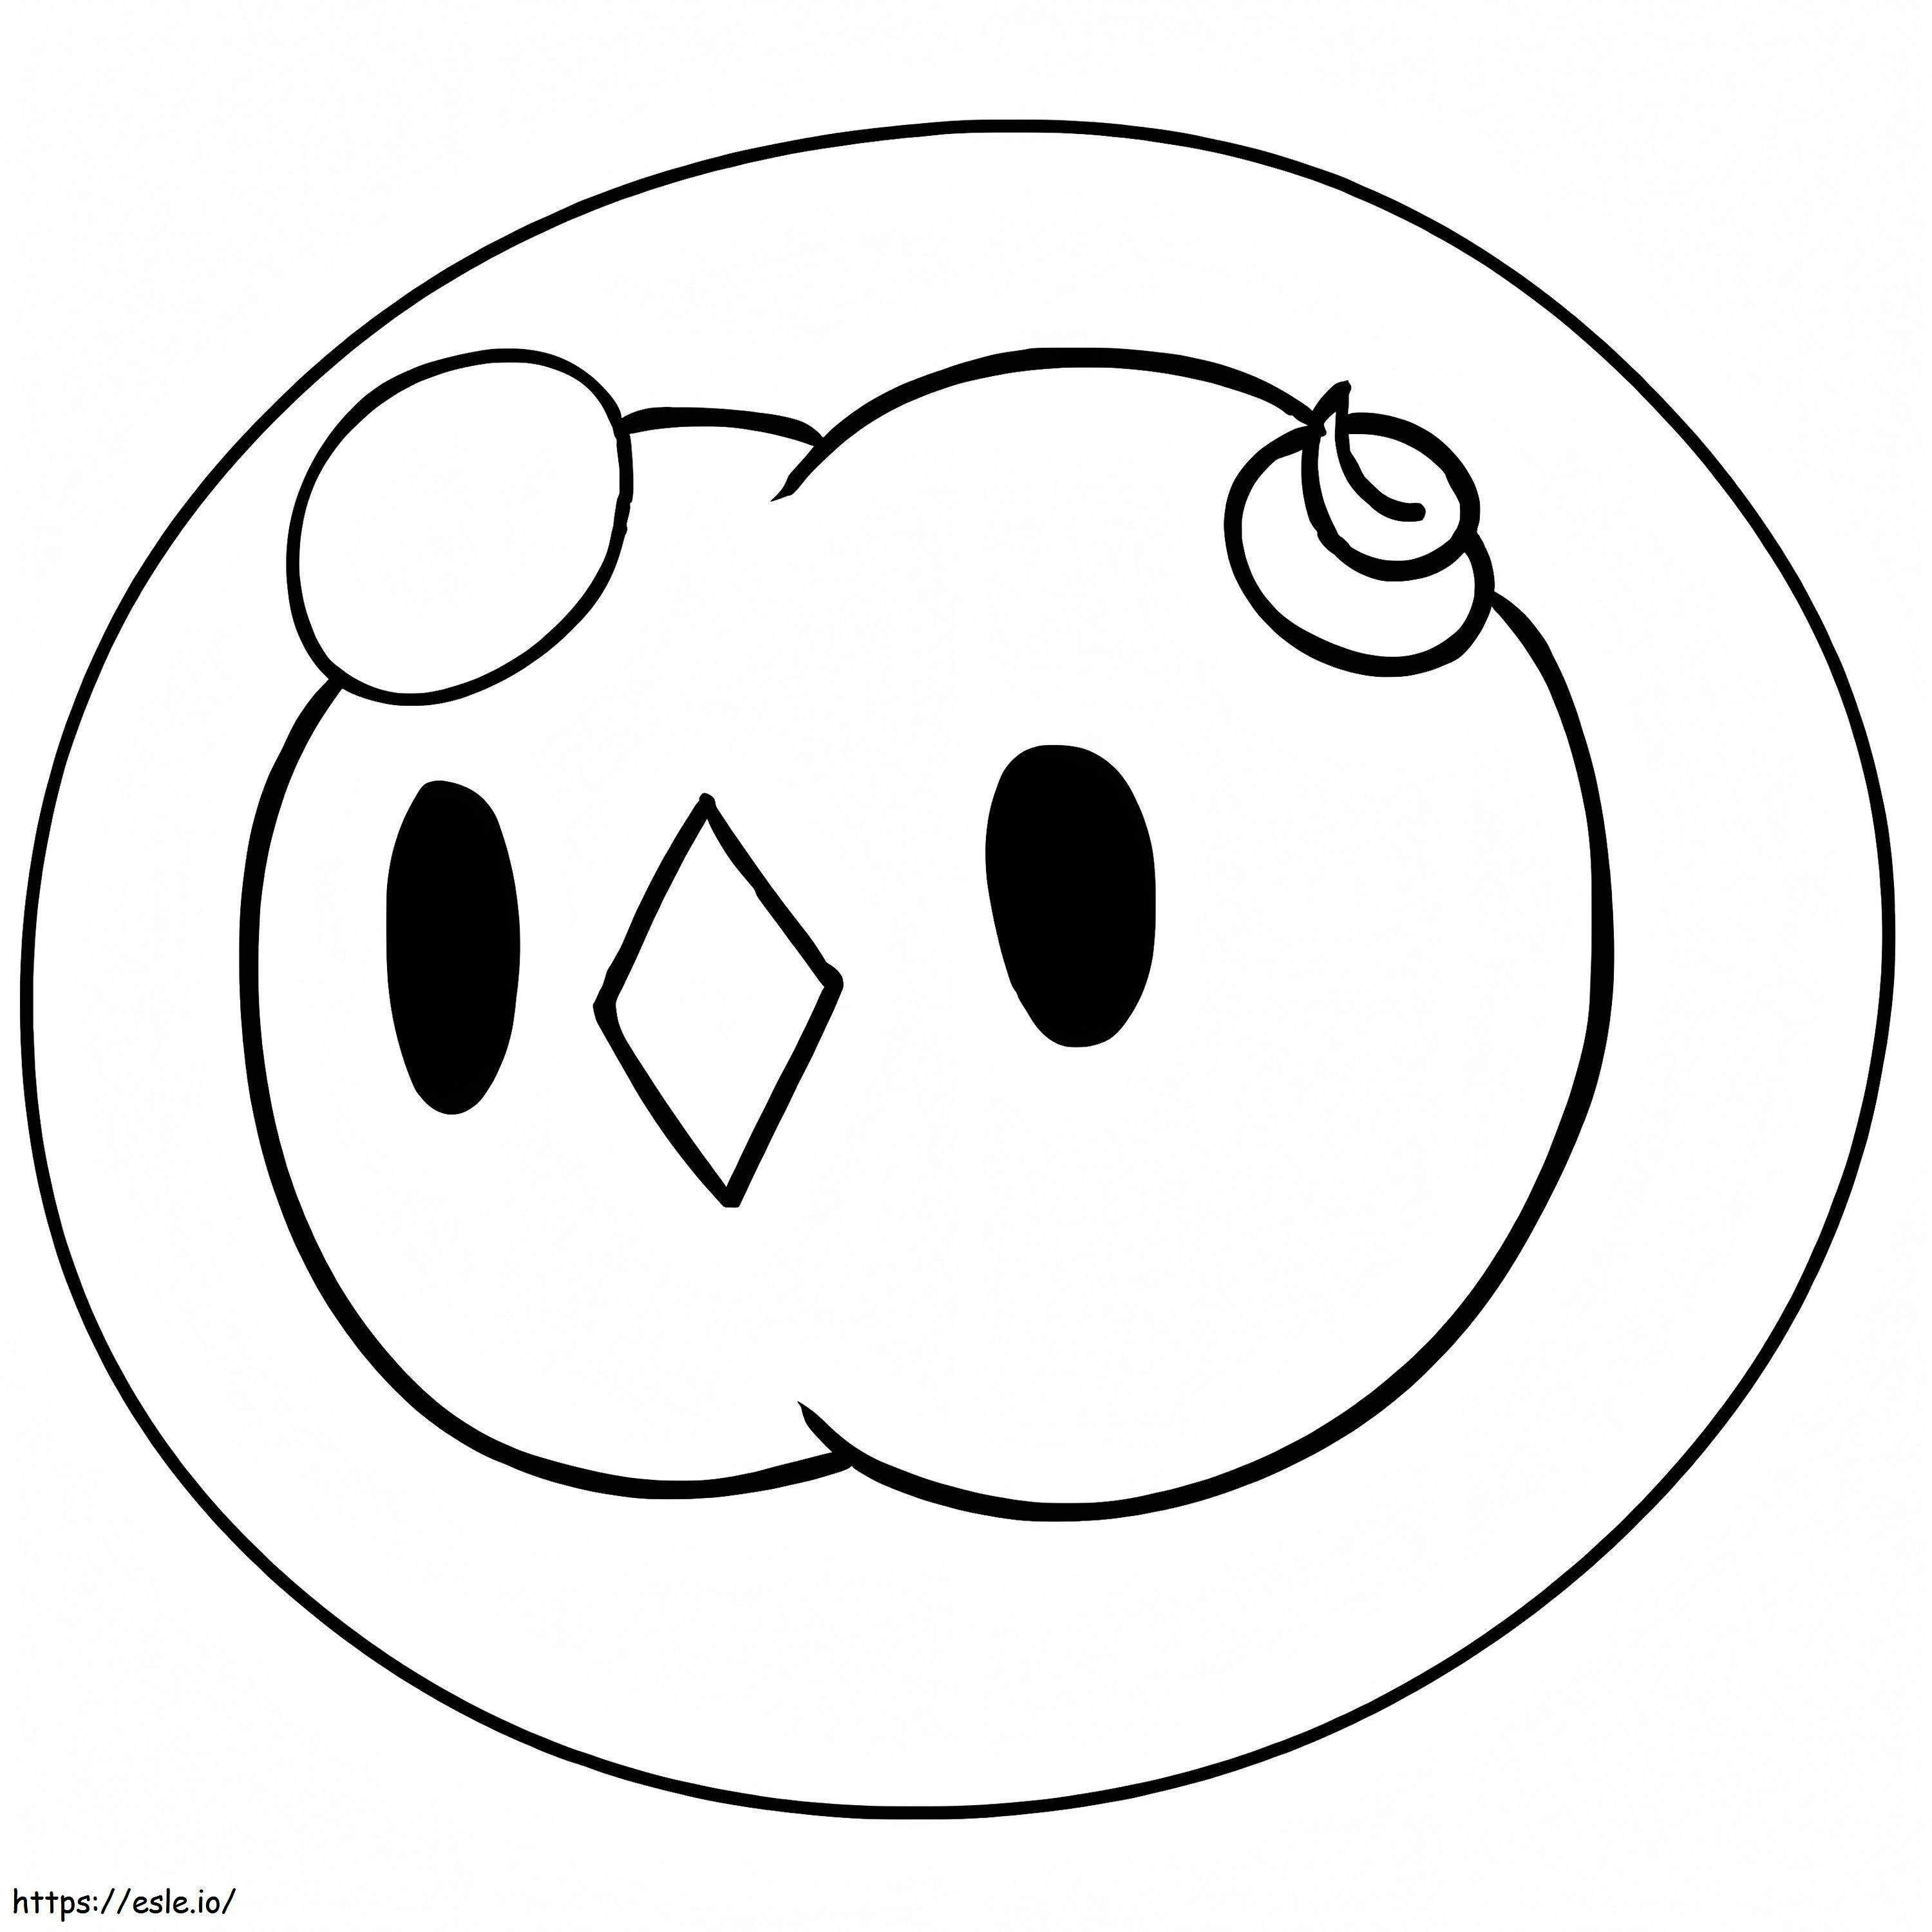 Solosis Pokemon coloring page